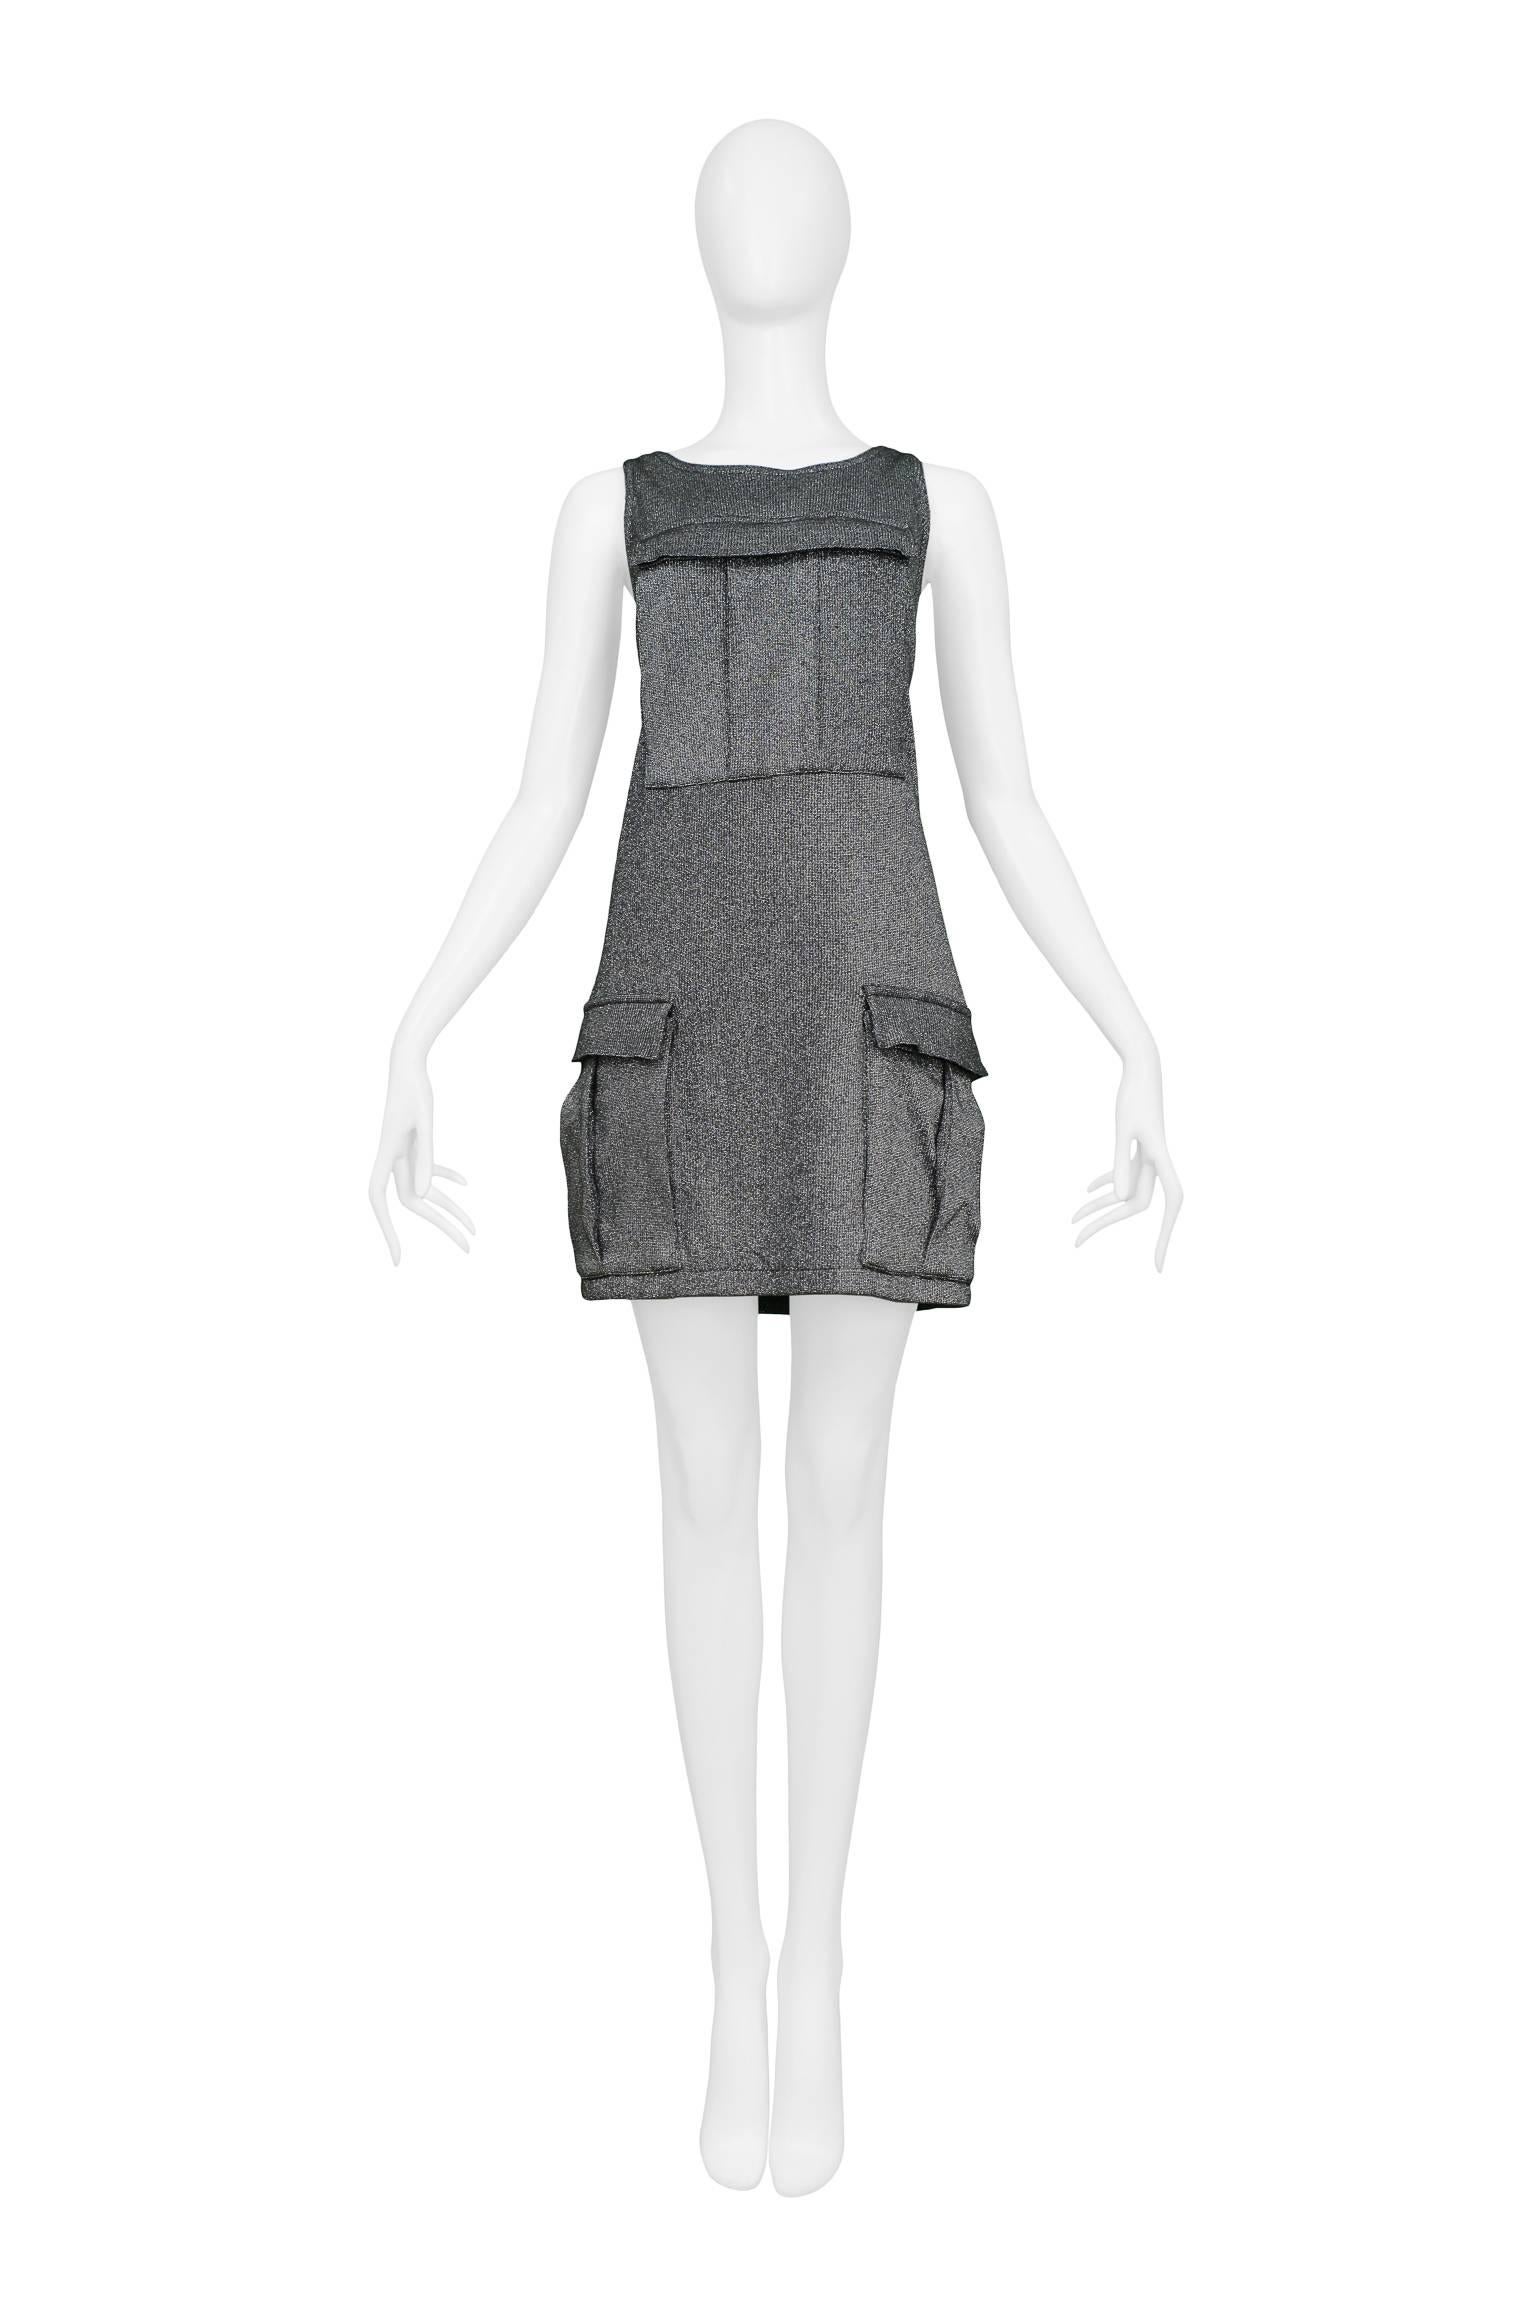 Vintage Stephen Sprouse metallic silver tank dress featuring cargo pockets on the bust and the sides. This dress comes fully lined. 